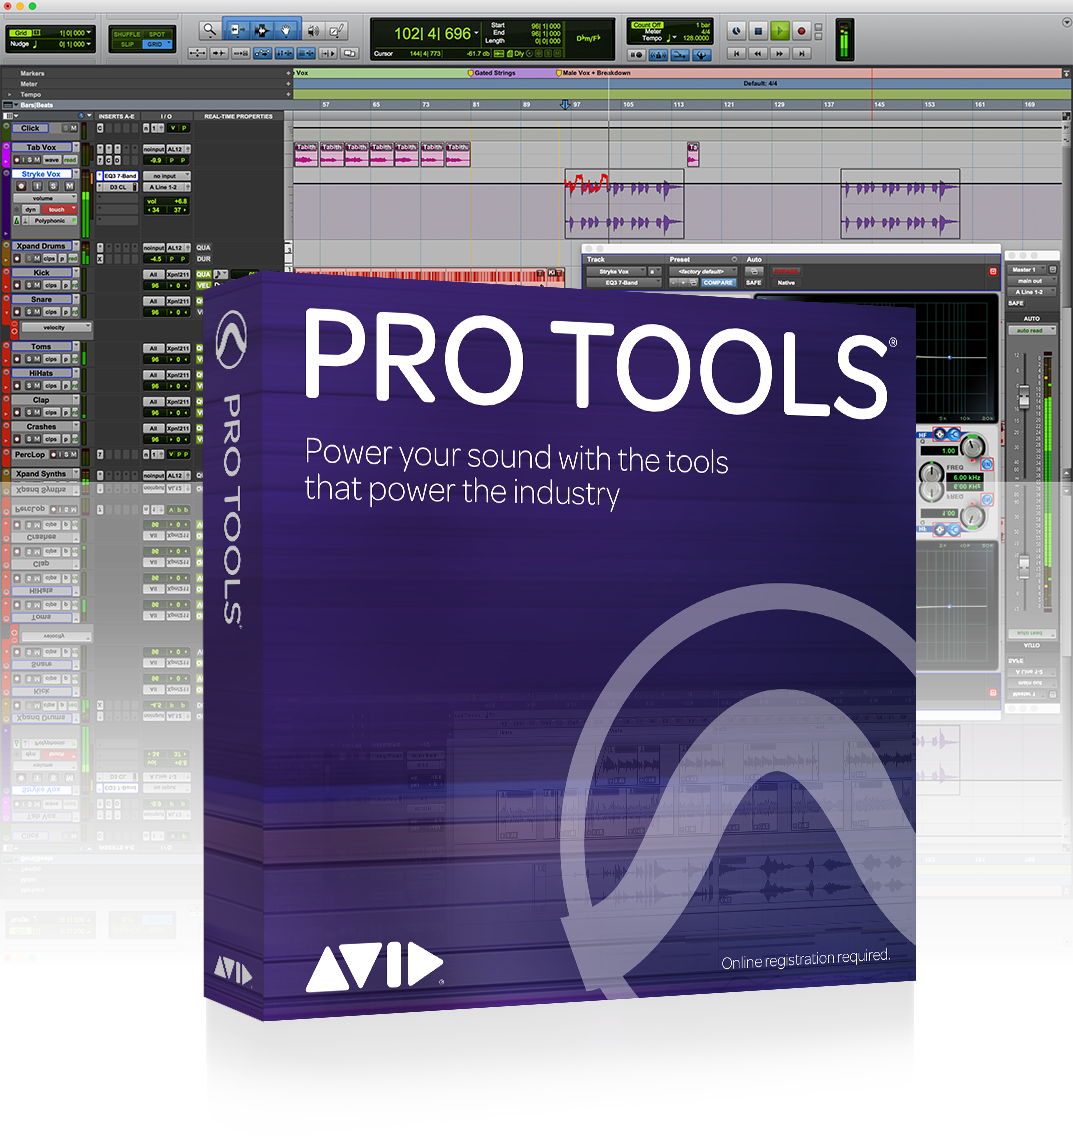 Avid Pro Tools 1-Year Software Updates and Support Plan RENEWAL